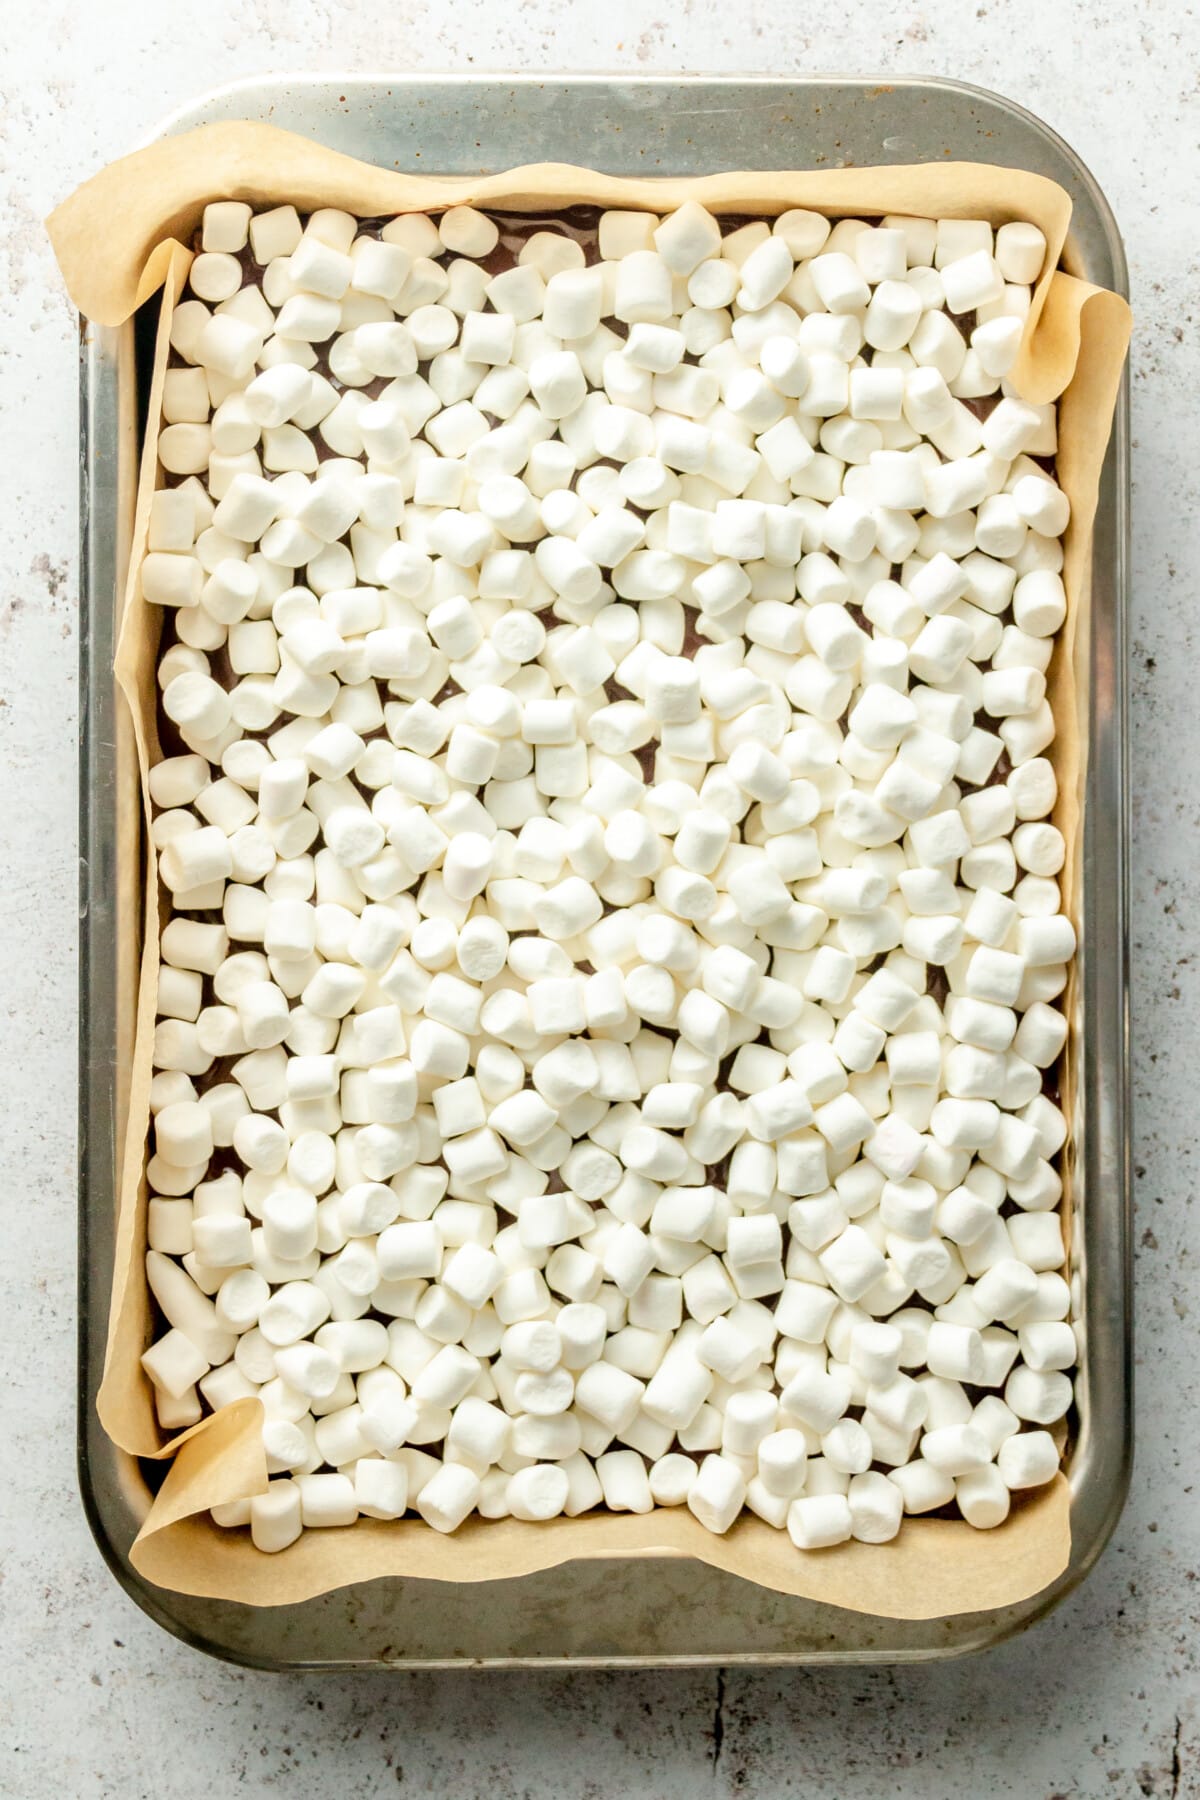 Mini marshmallows sit on a lined rimmed tray on a light grey surface.